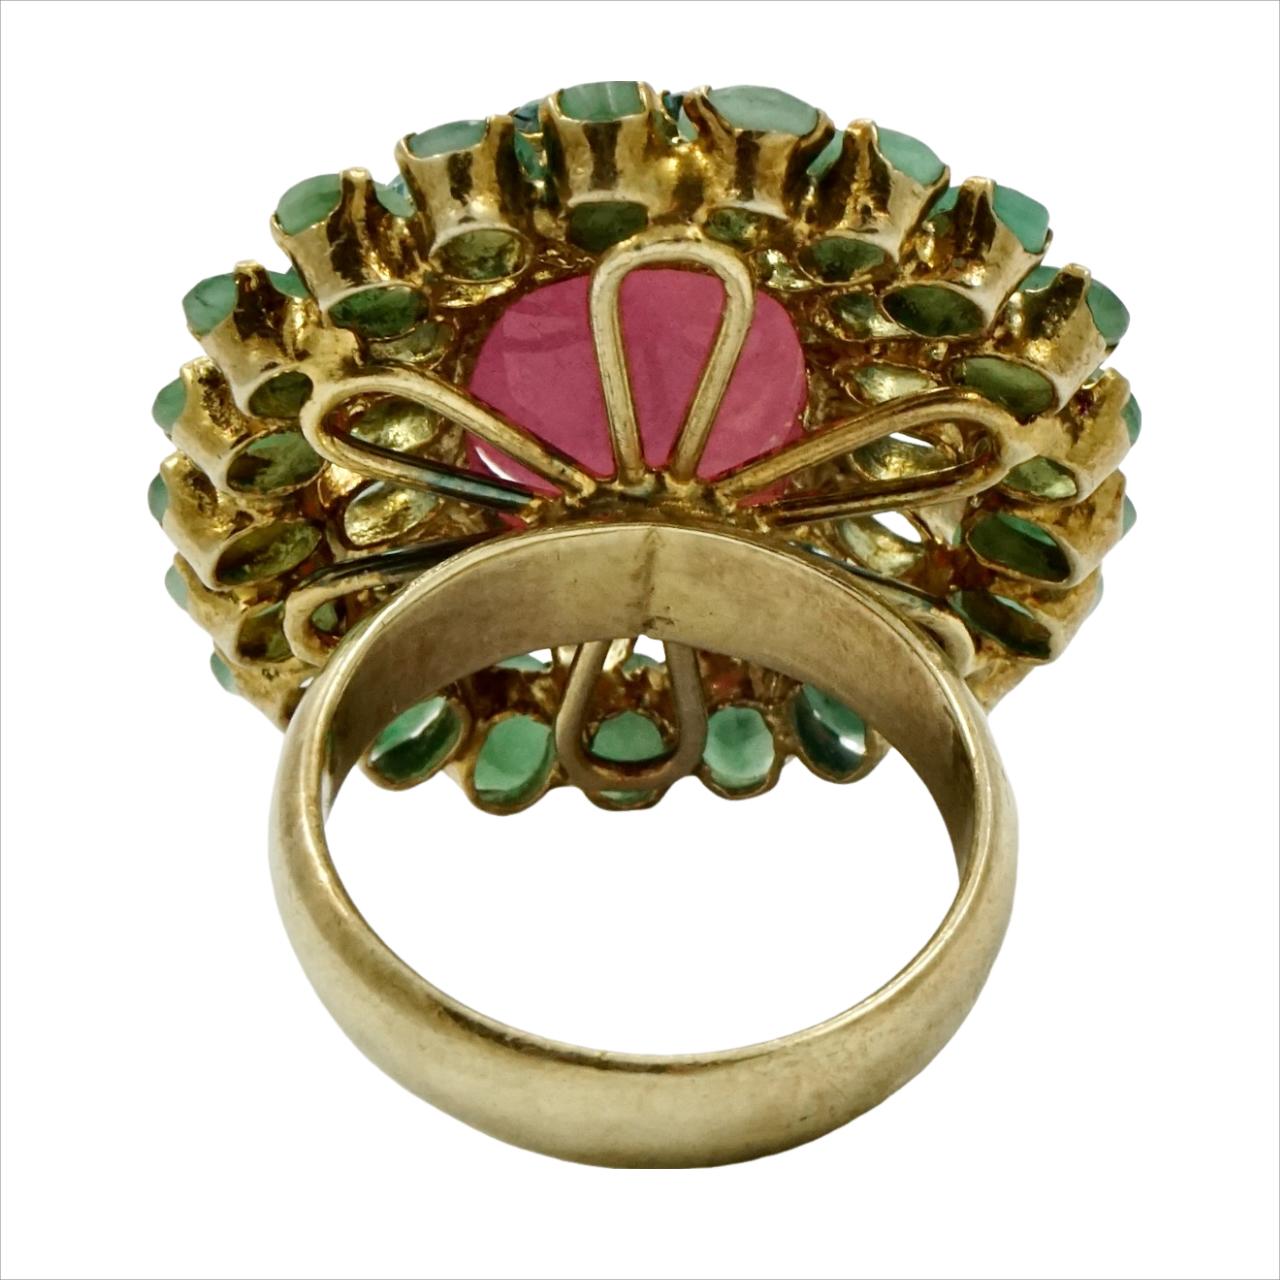 Women's or Men's Gold Vermeil on Sterling Silver Cocktail Ring with Blue Topaz, Emerald and Ruby